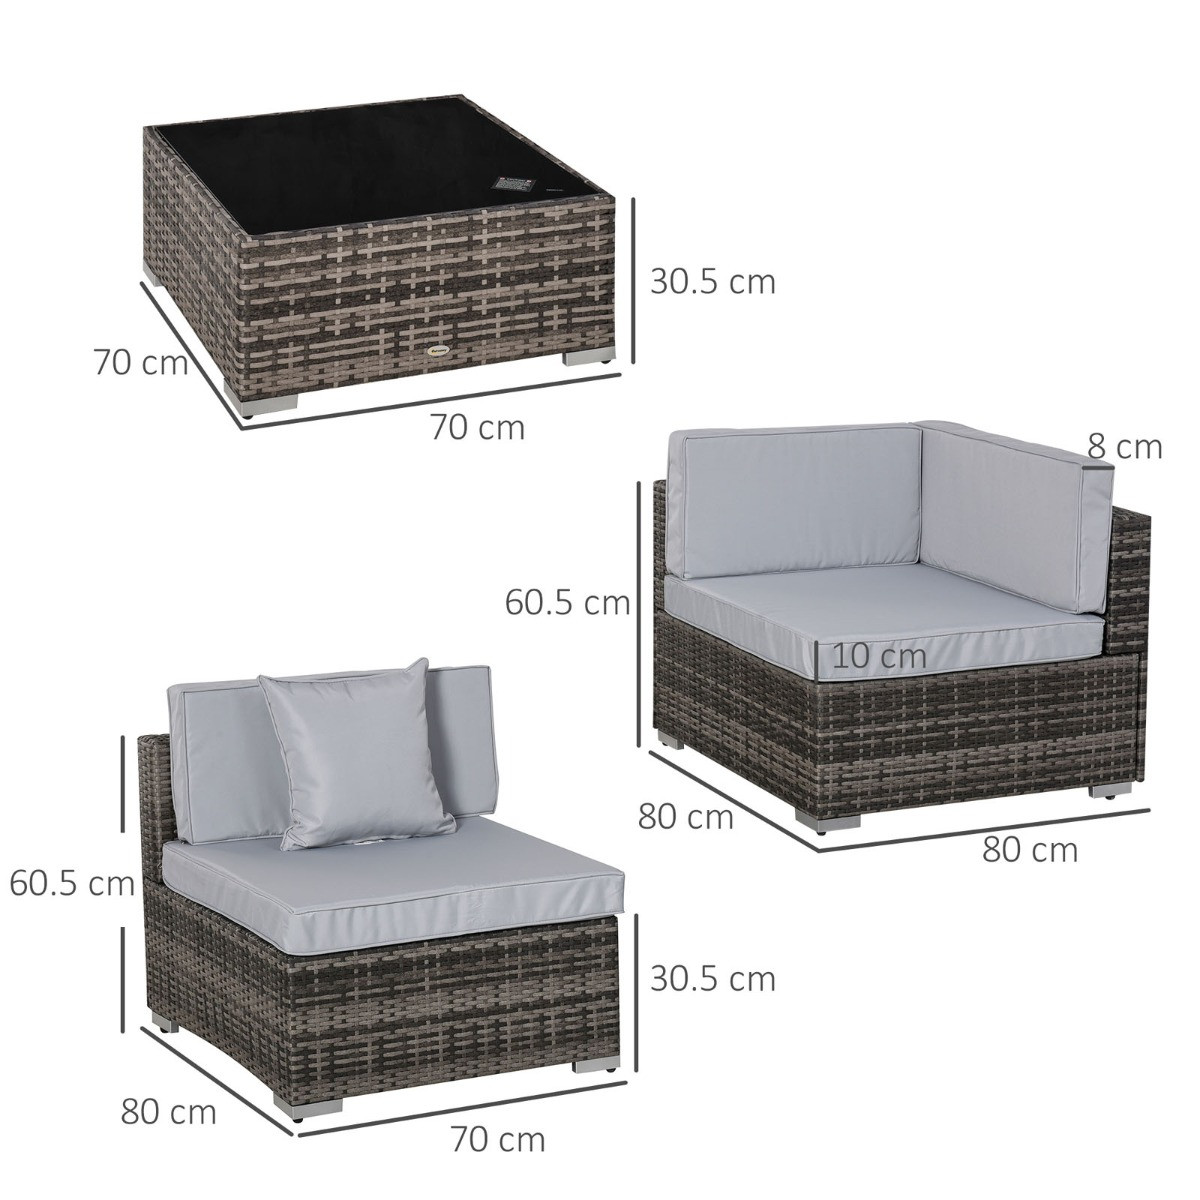 Outsunny Wicker Rattan Sectional Sofa Furniture Set, Grey - 6 Seater>